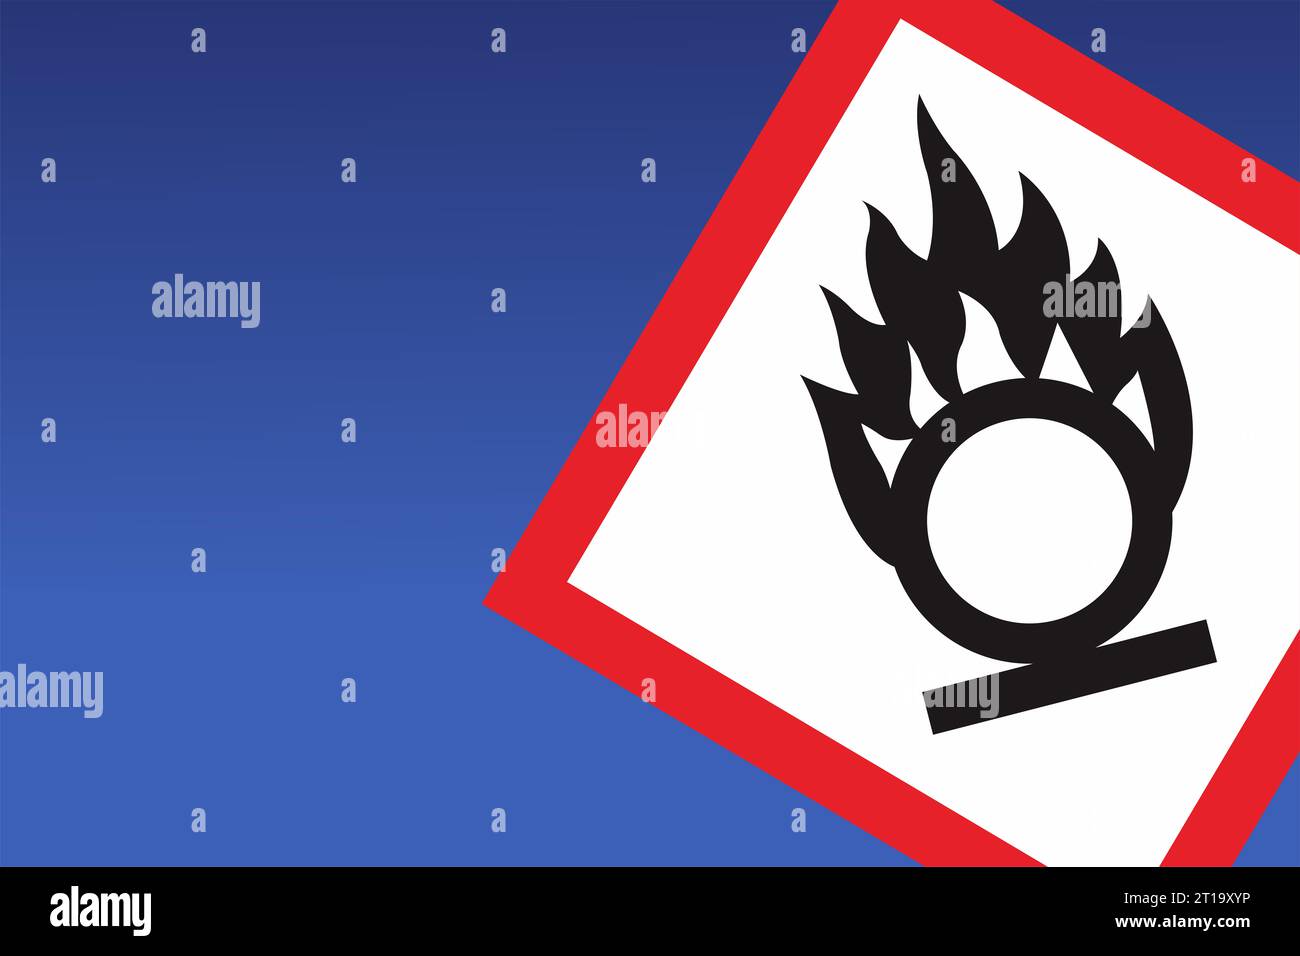 Hazard Communication GHS Pictograms and Hazard Classes Oxidizers Stock Photo